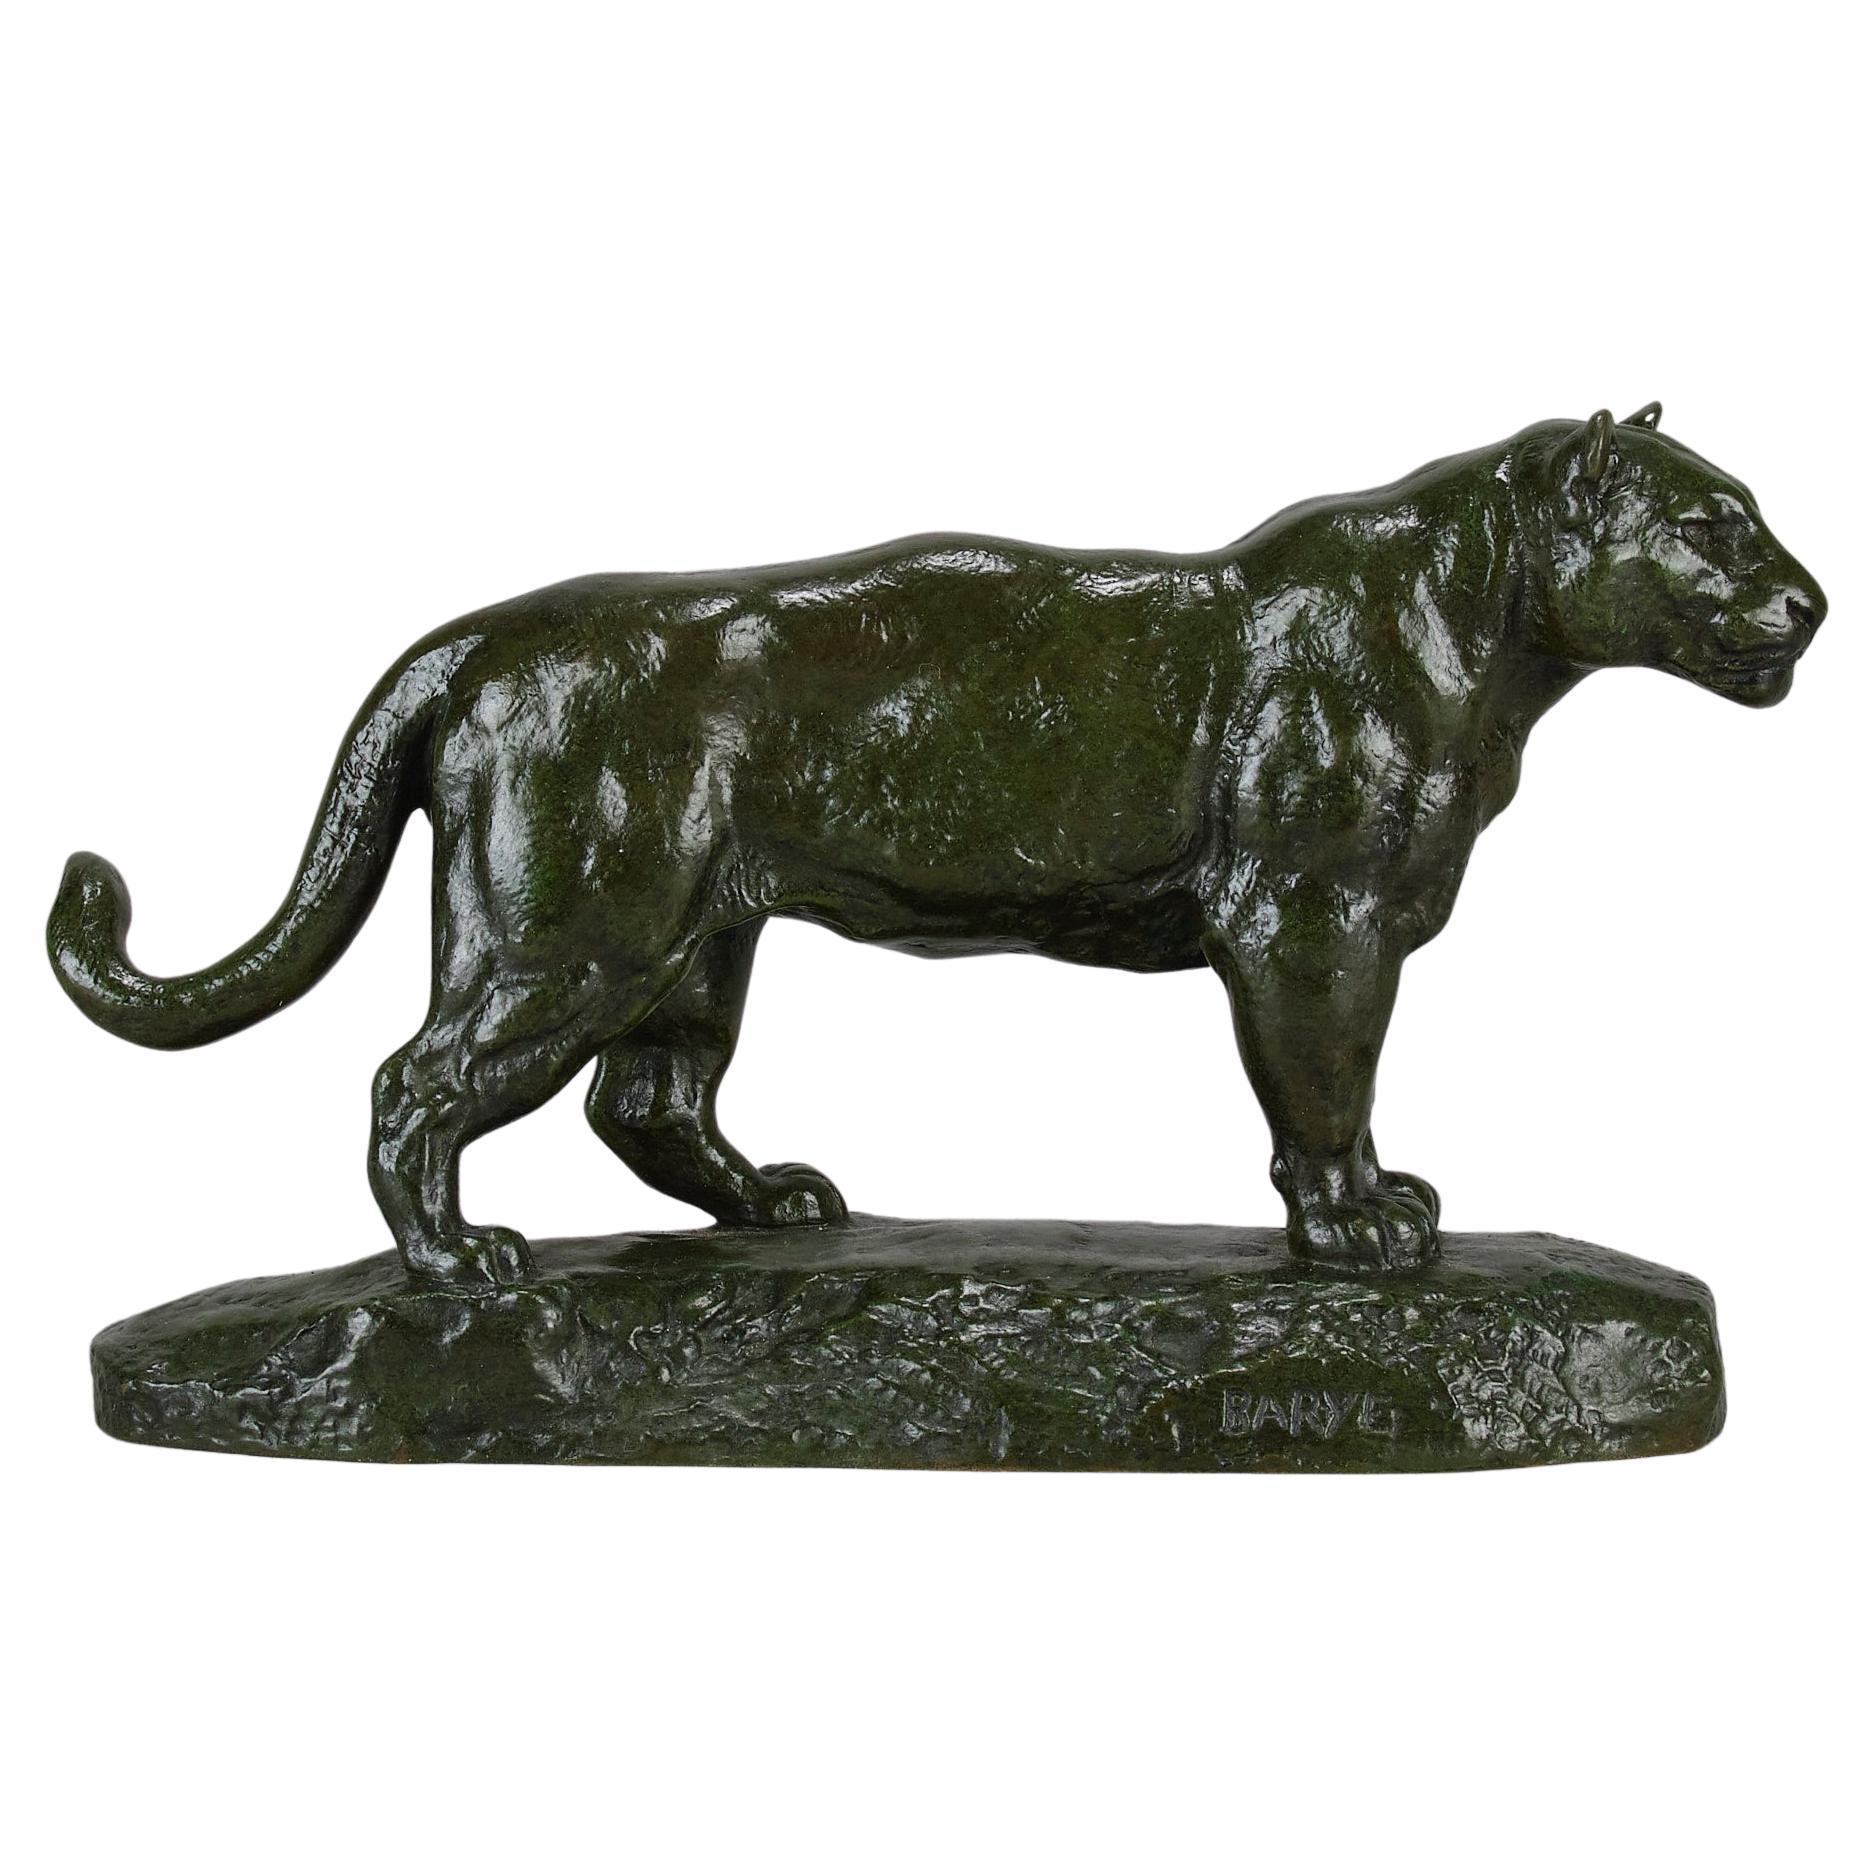 Who is the most famous animal sculptor of all time?